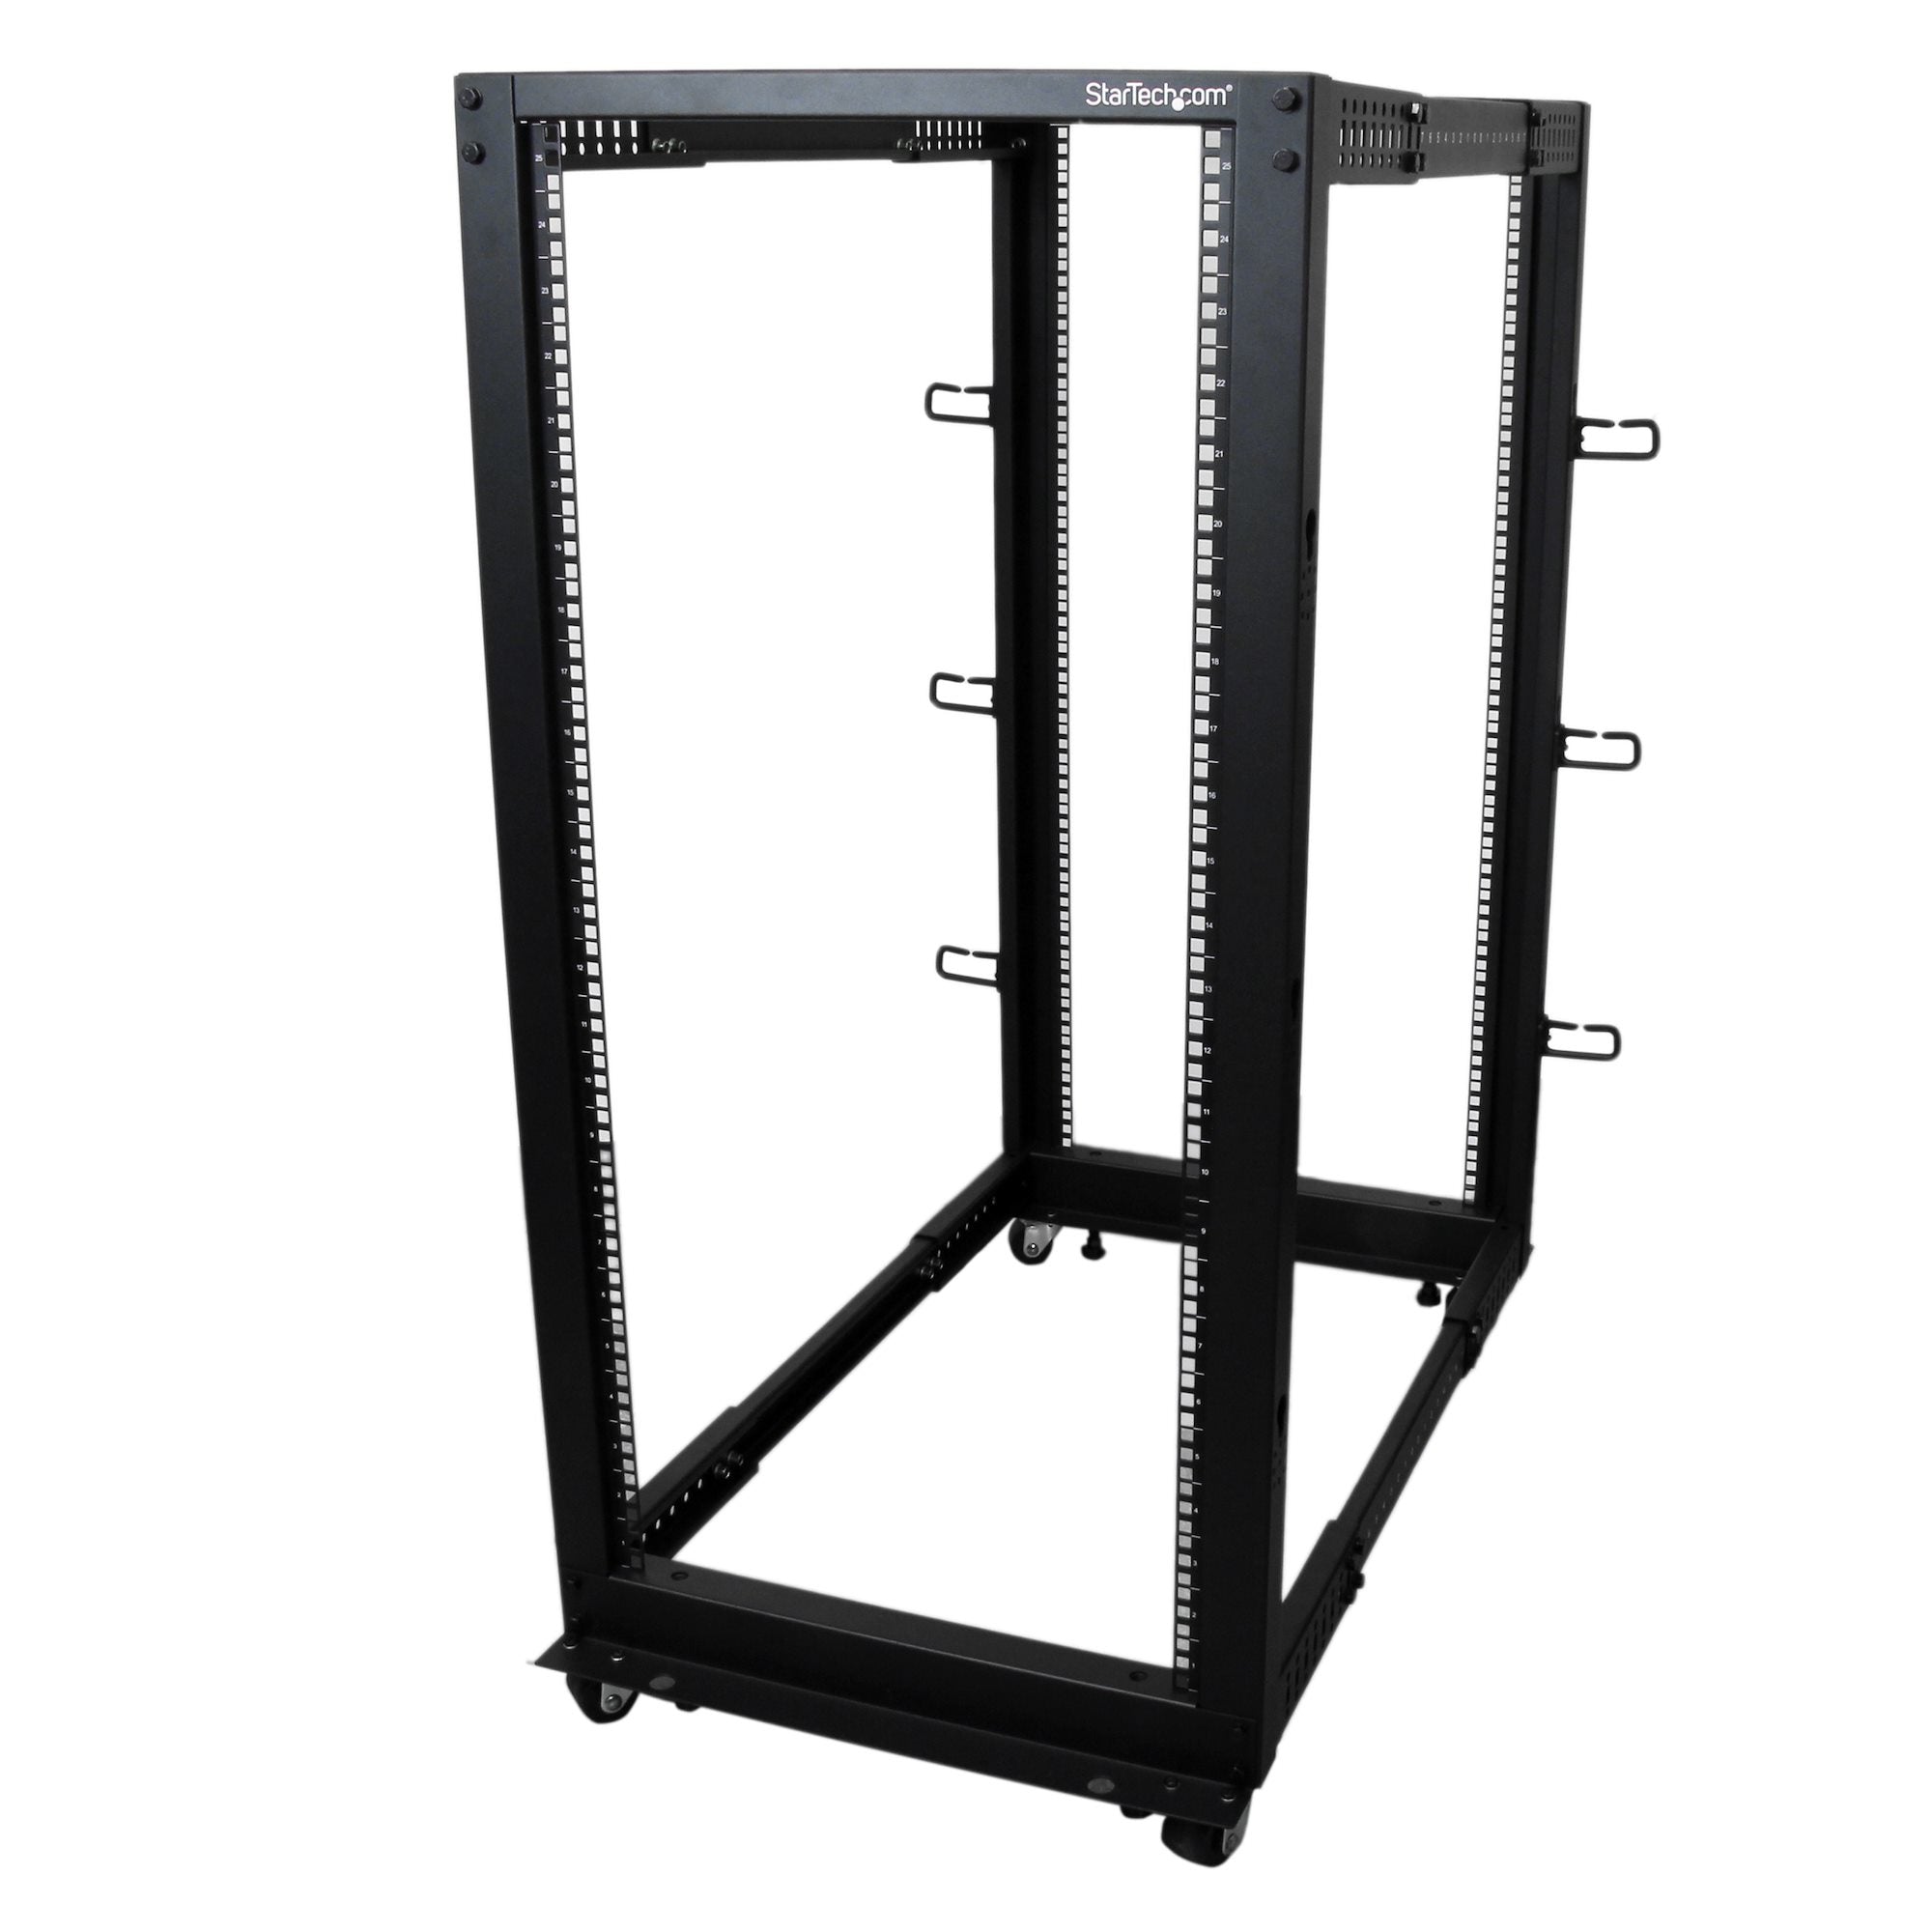 StarTech.com 4-Post 25U Mobile Open Frame Server Rack, Four Post 19in Network Rack with Wheels, Rolling Rack with Adjustable Depth for Computer/AV/Data/IT Equipment - Casters, Leveling Feet or Floor Mounting